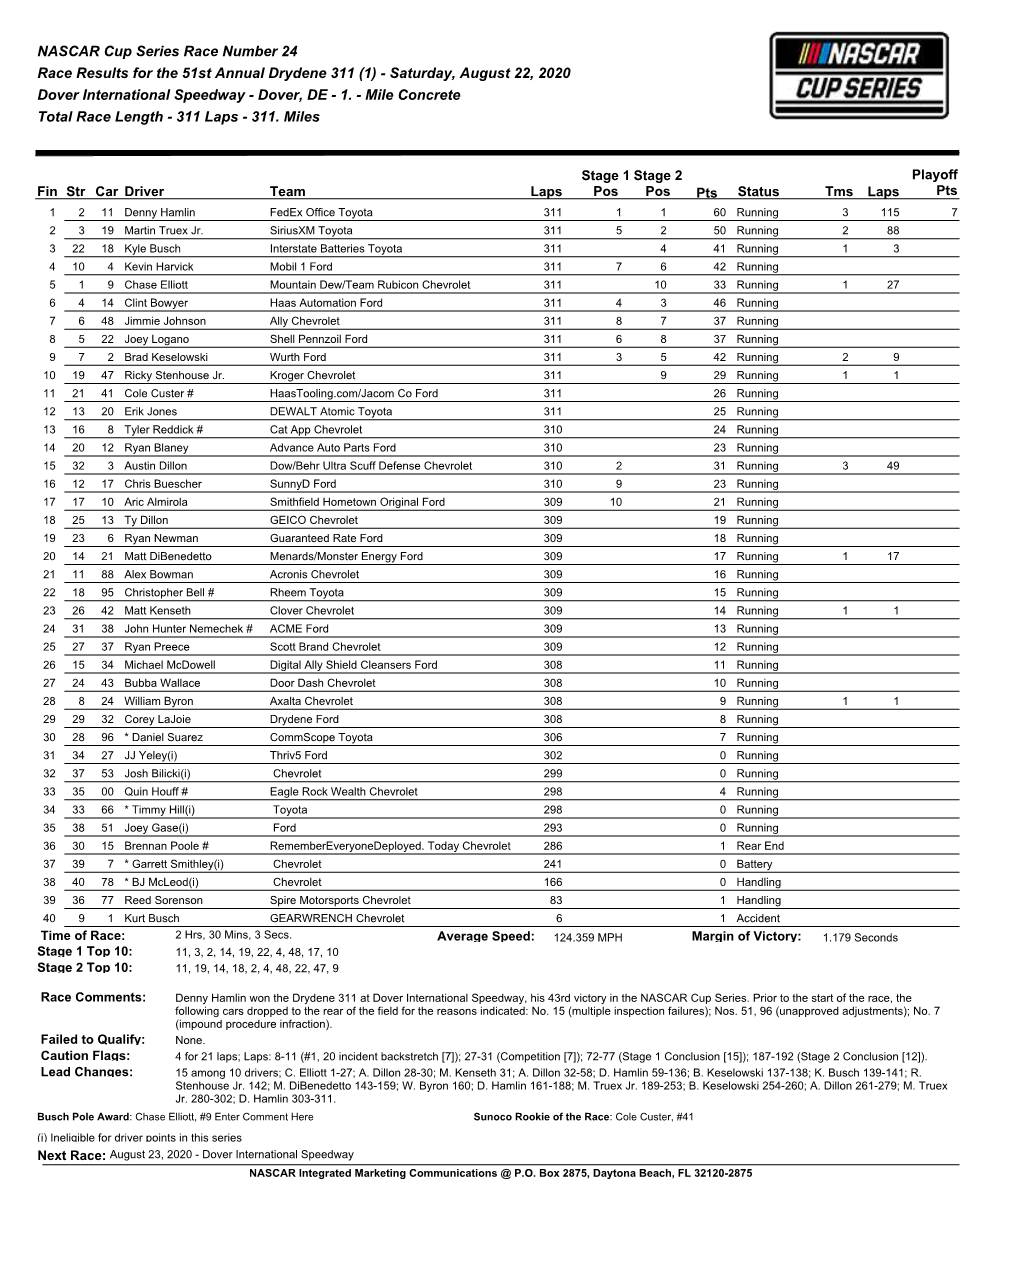 Race Results for the 51St Annual Drydene 311 (1) - Saturday, August 22, 2020 Dover International Speedway - Dover, DE - 1